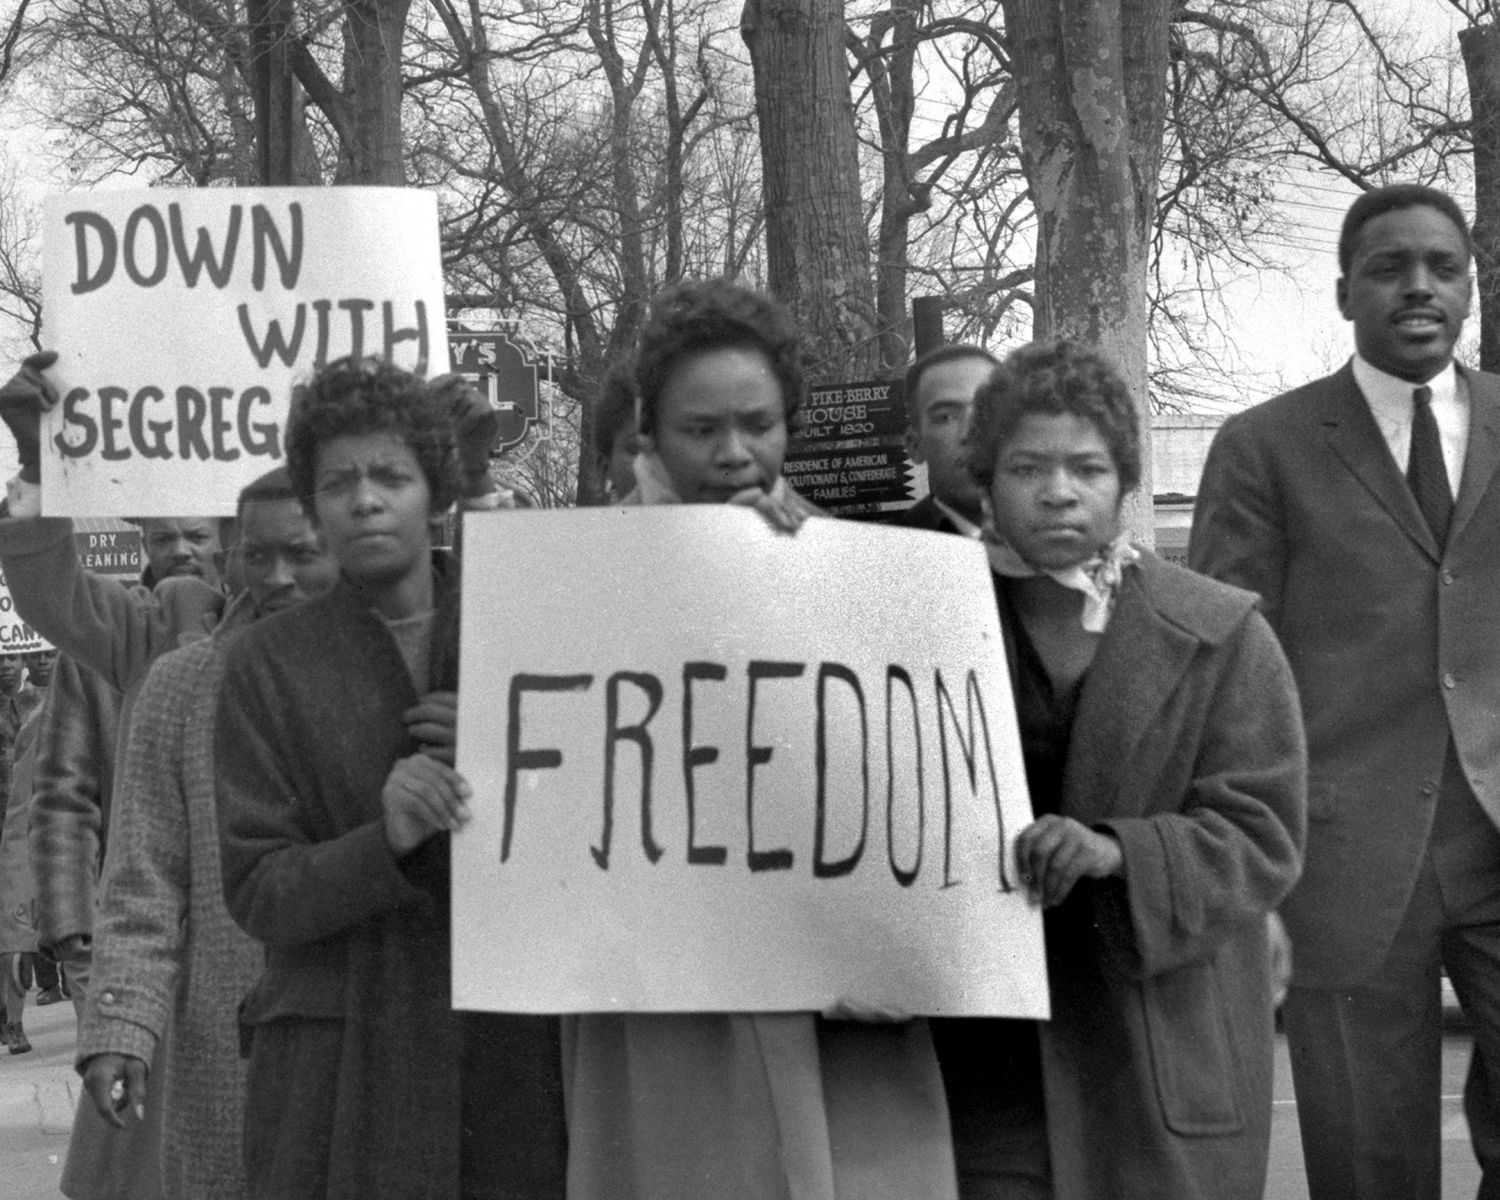 Hundreds of images from photographer Cecil Williams documenting South Carolina's civil rights movement are on display at the Cecil Williams South Carolina Civil Rights Museum in Orangeburg. (Photo/Courtesy of Cecil Williams South Carolina Civil Rights Museum)